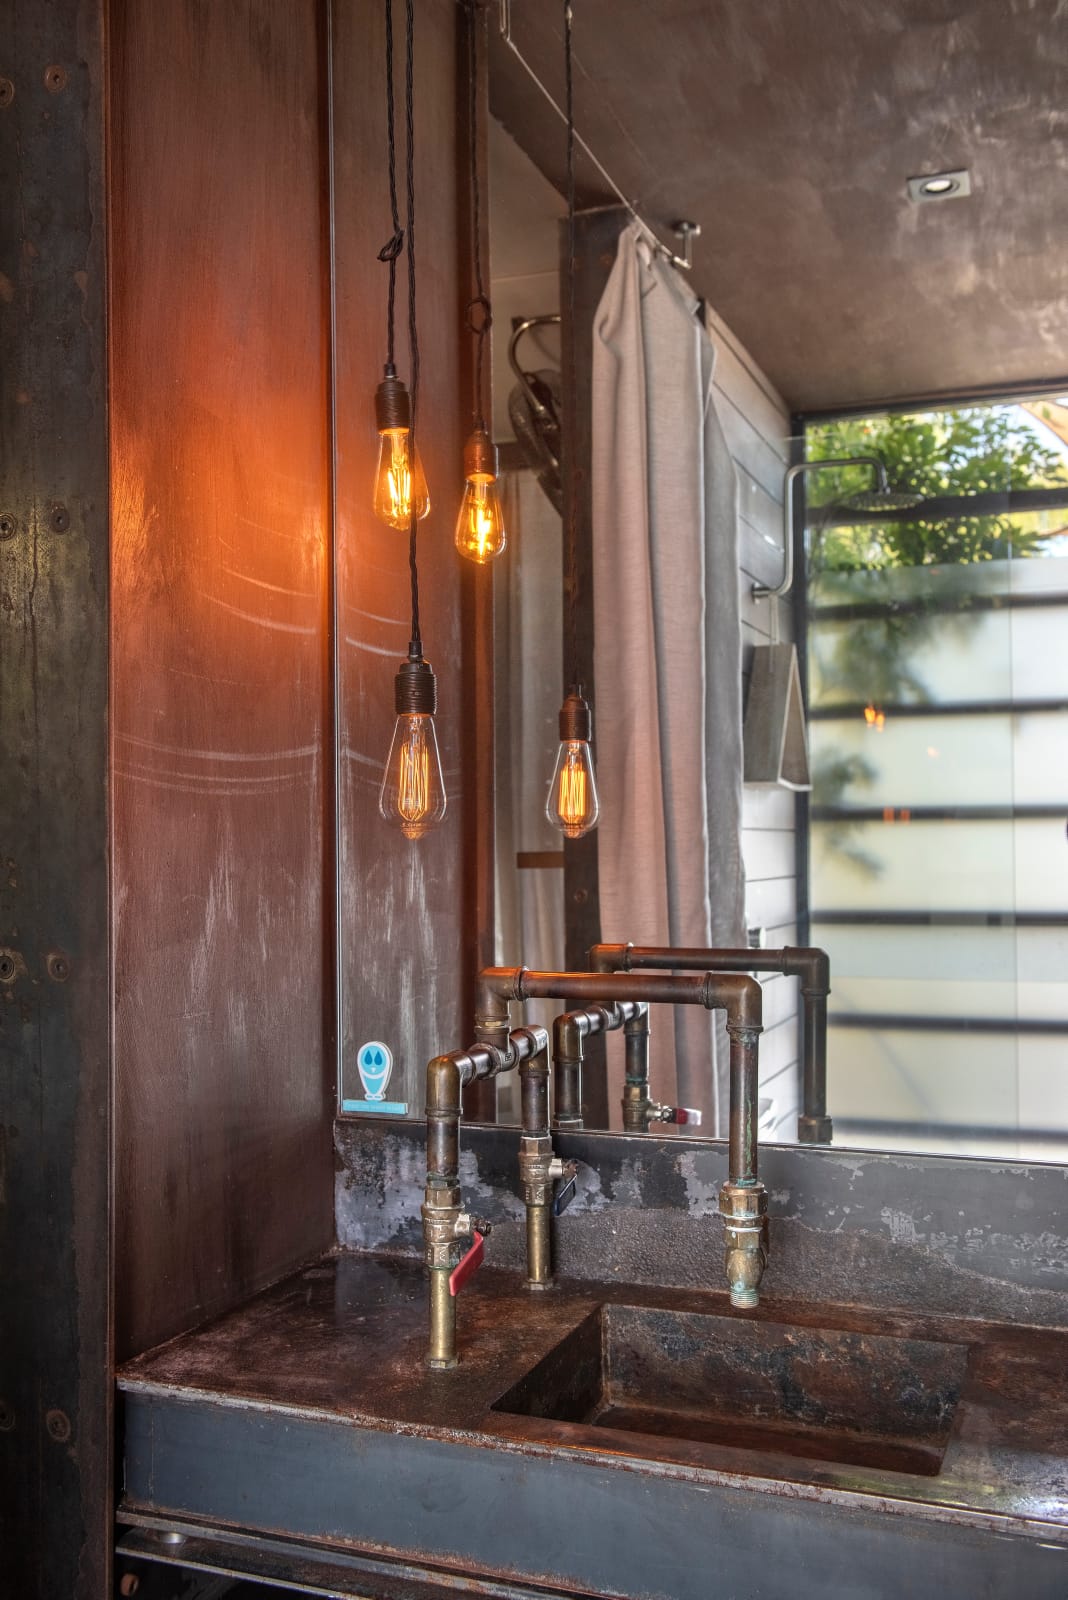 Bill's Boathouse. An interior view of the rustic and industrial style bathroom